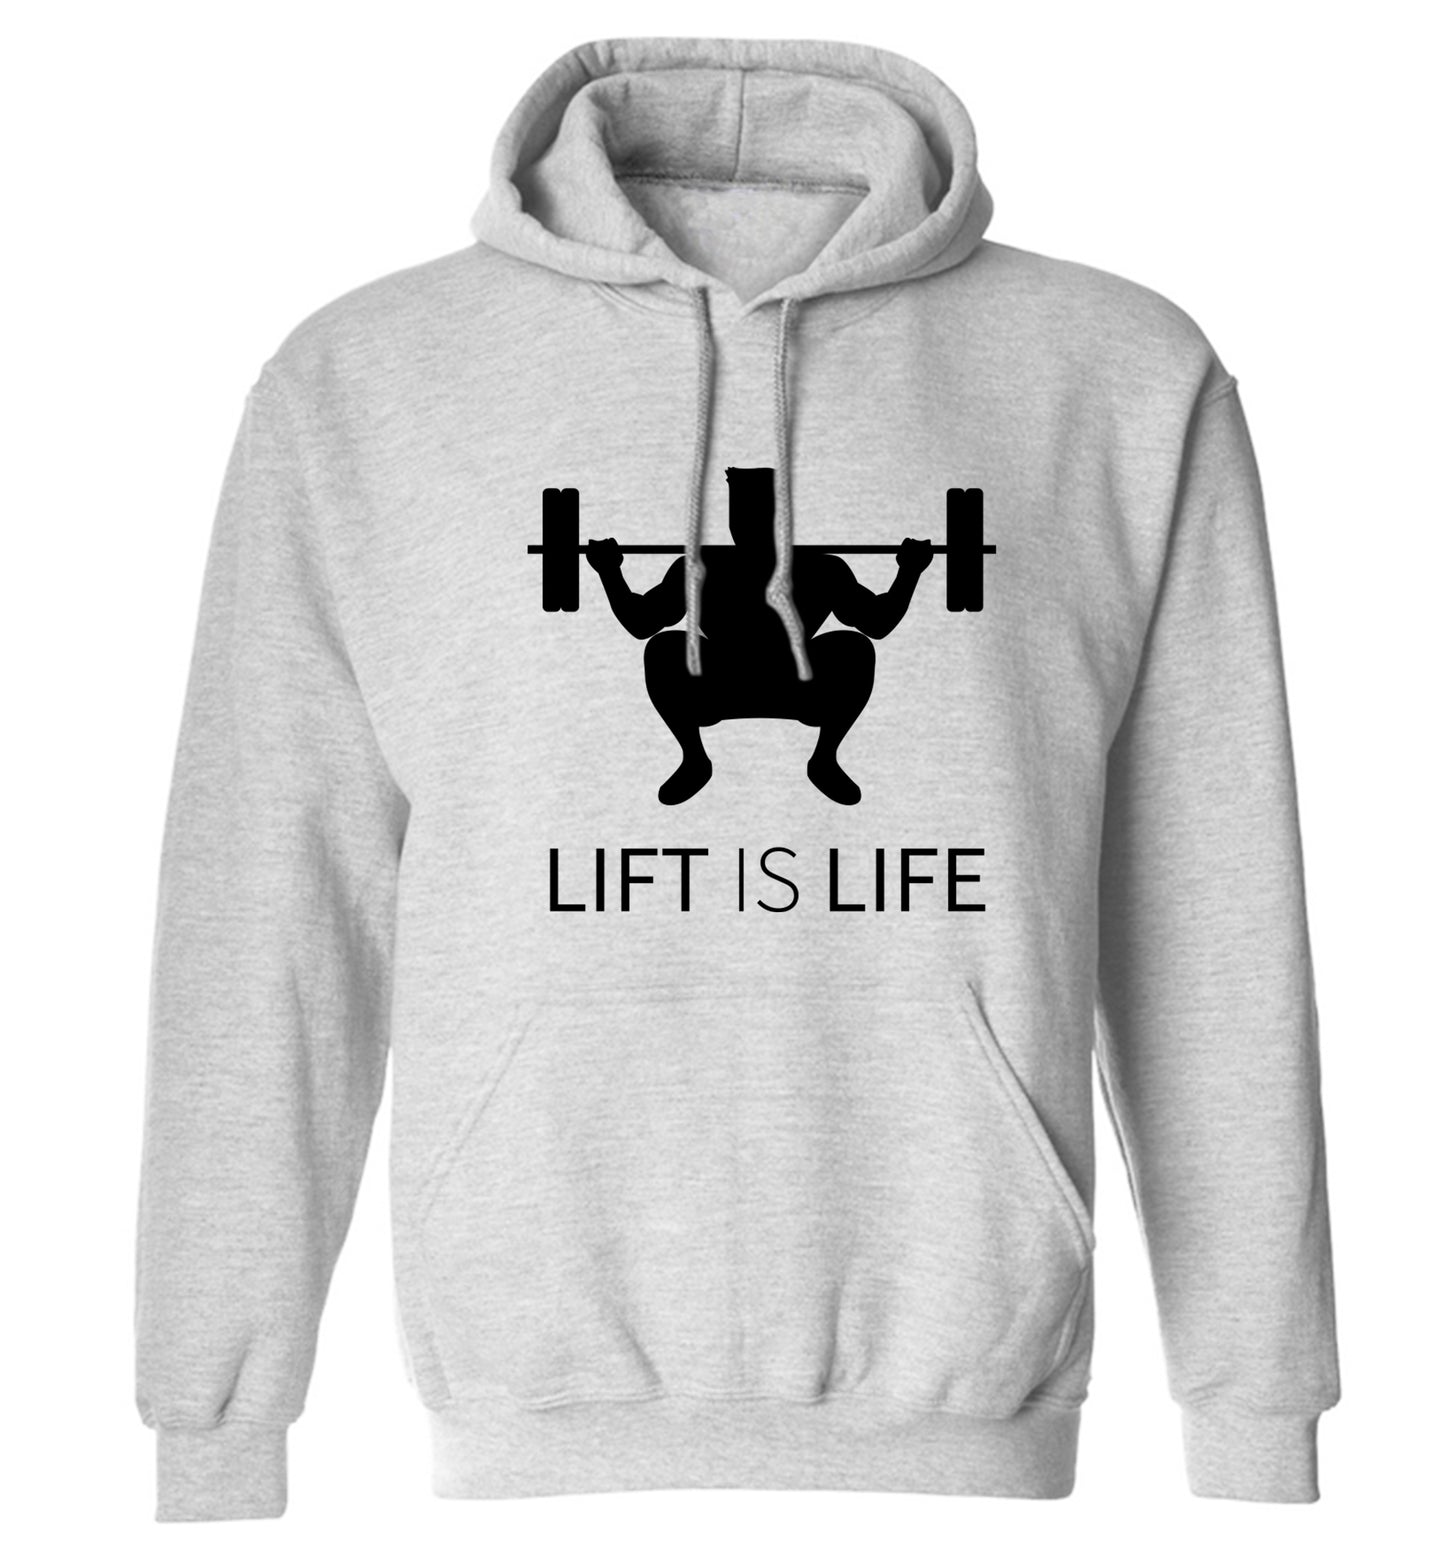 Lift is life adults unisex grey hoodie 2XL